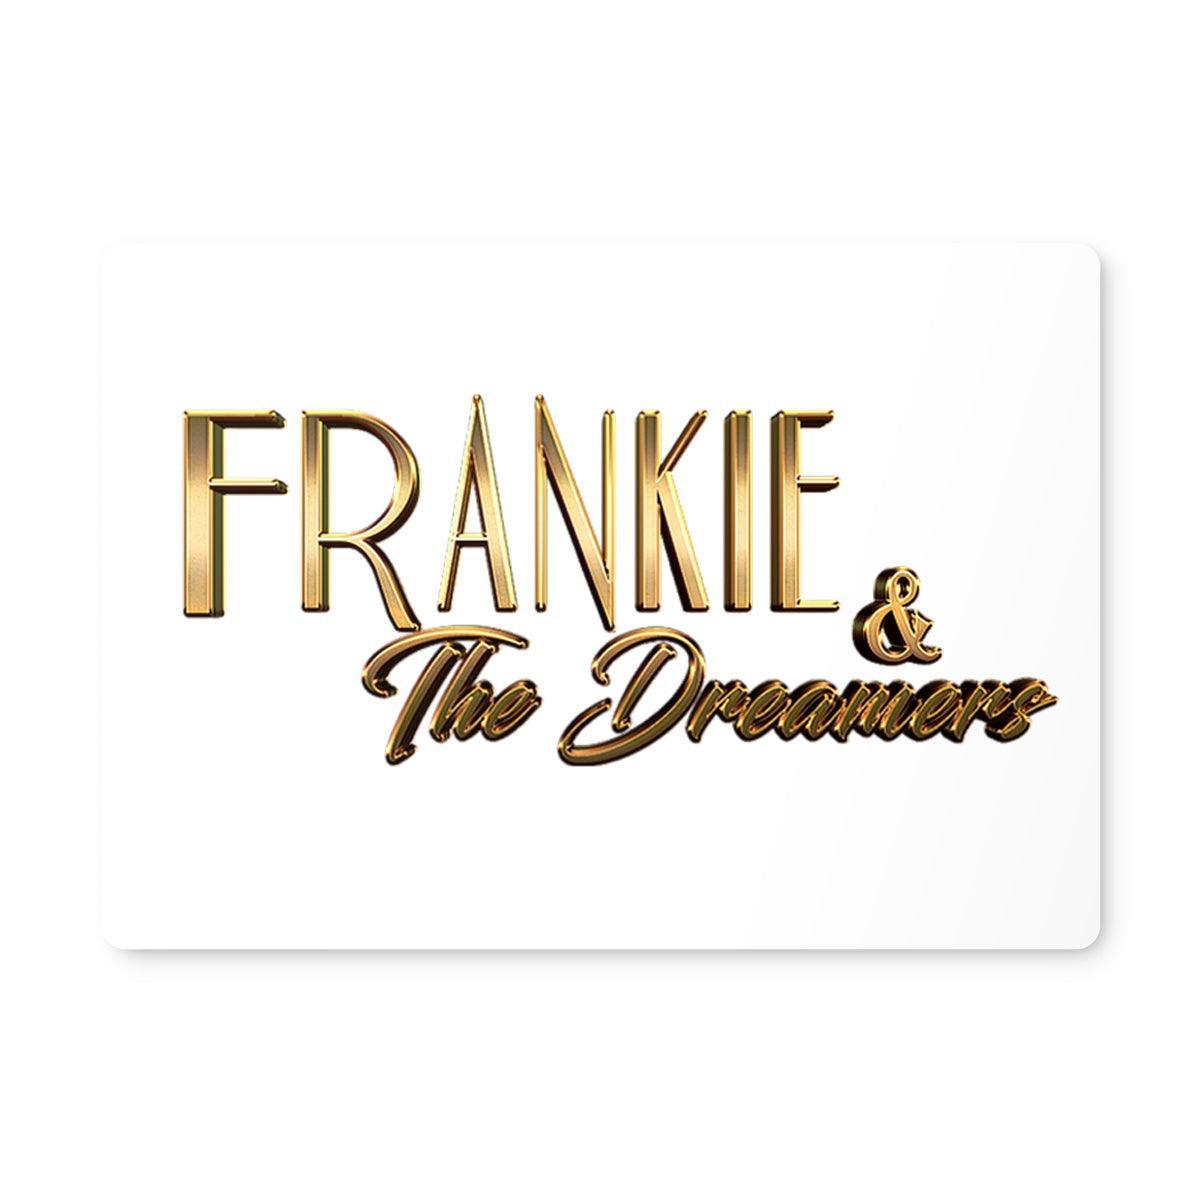 Frankie And The Dreamers Placemat | Homeware 6 Placemats